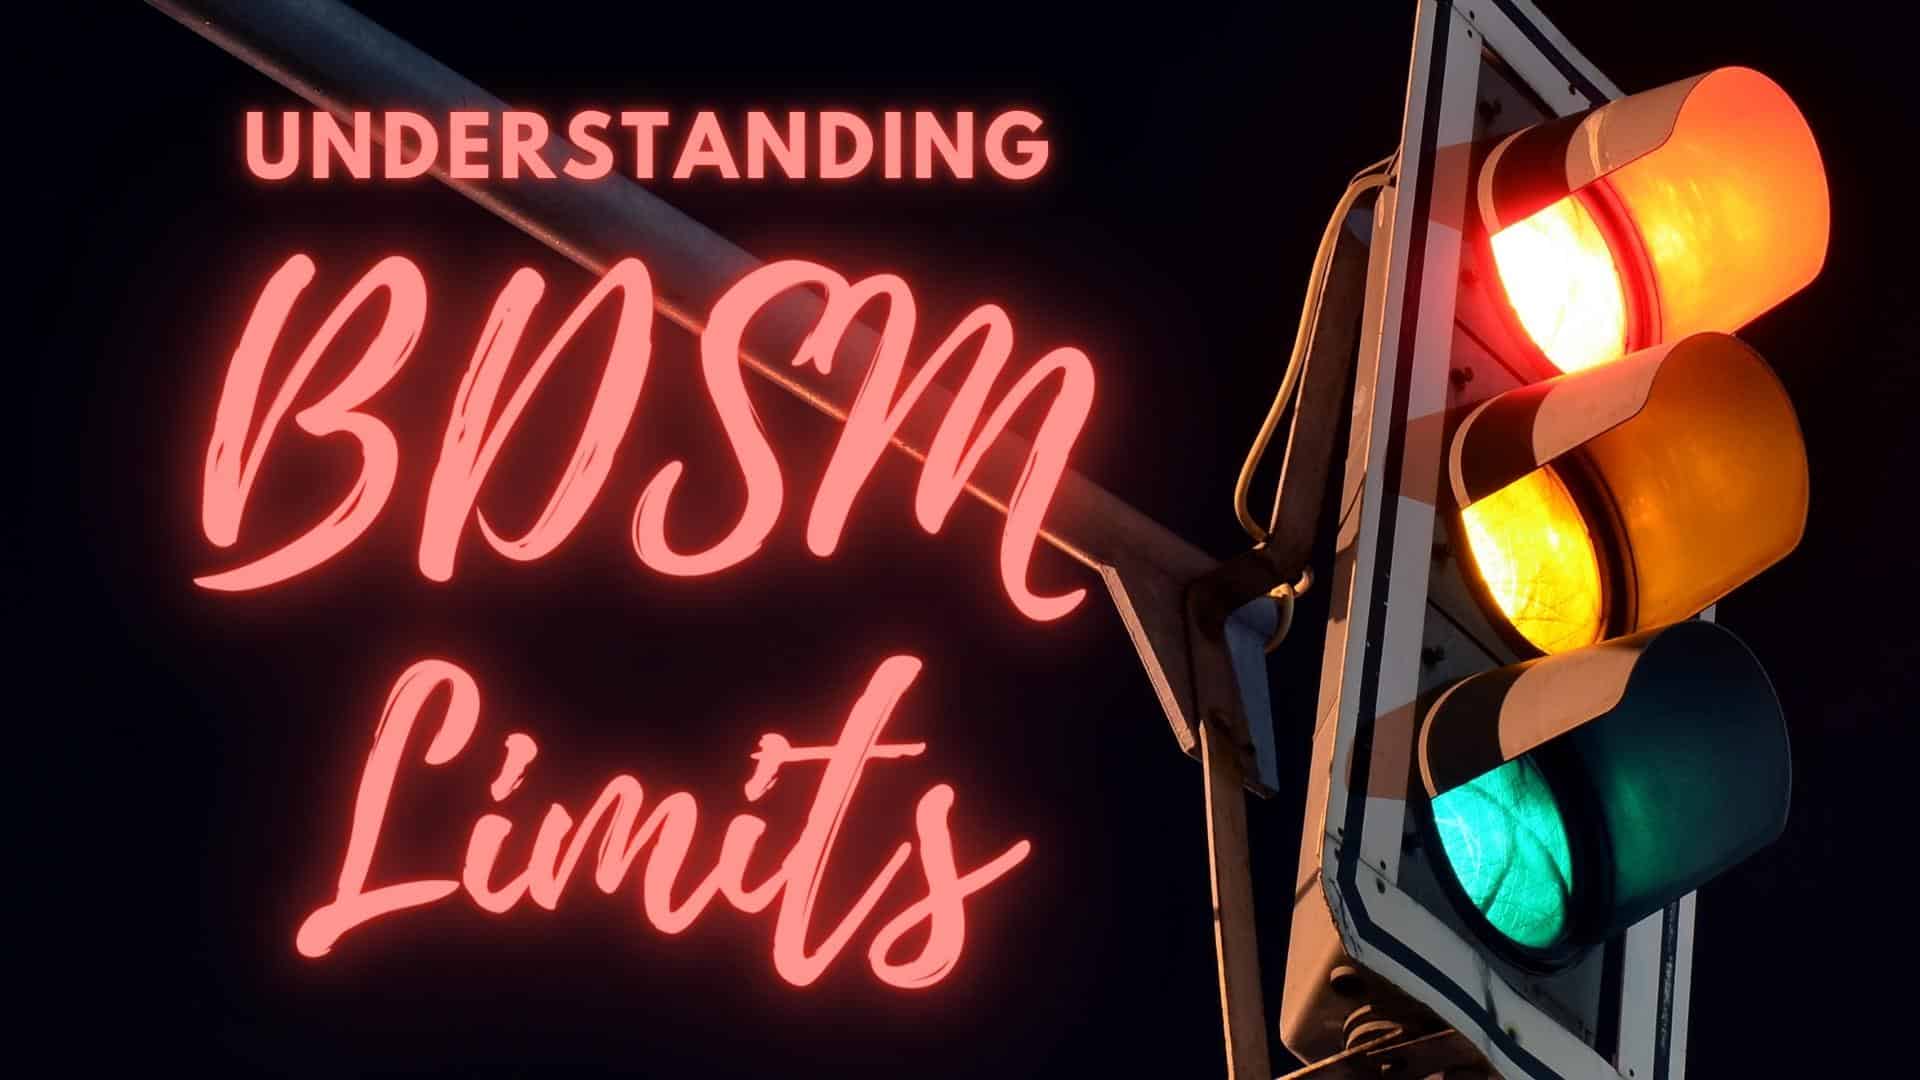 BDSM Limits: How To Use Hard & Soft Limits for Safe BDSM